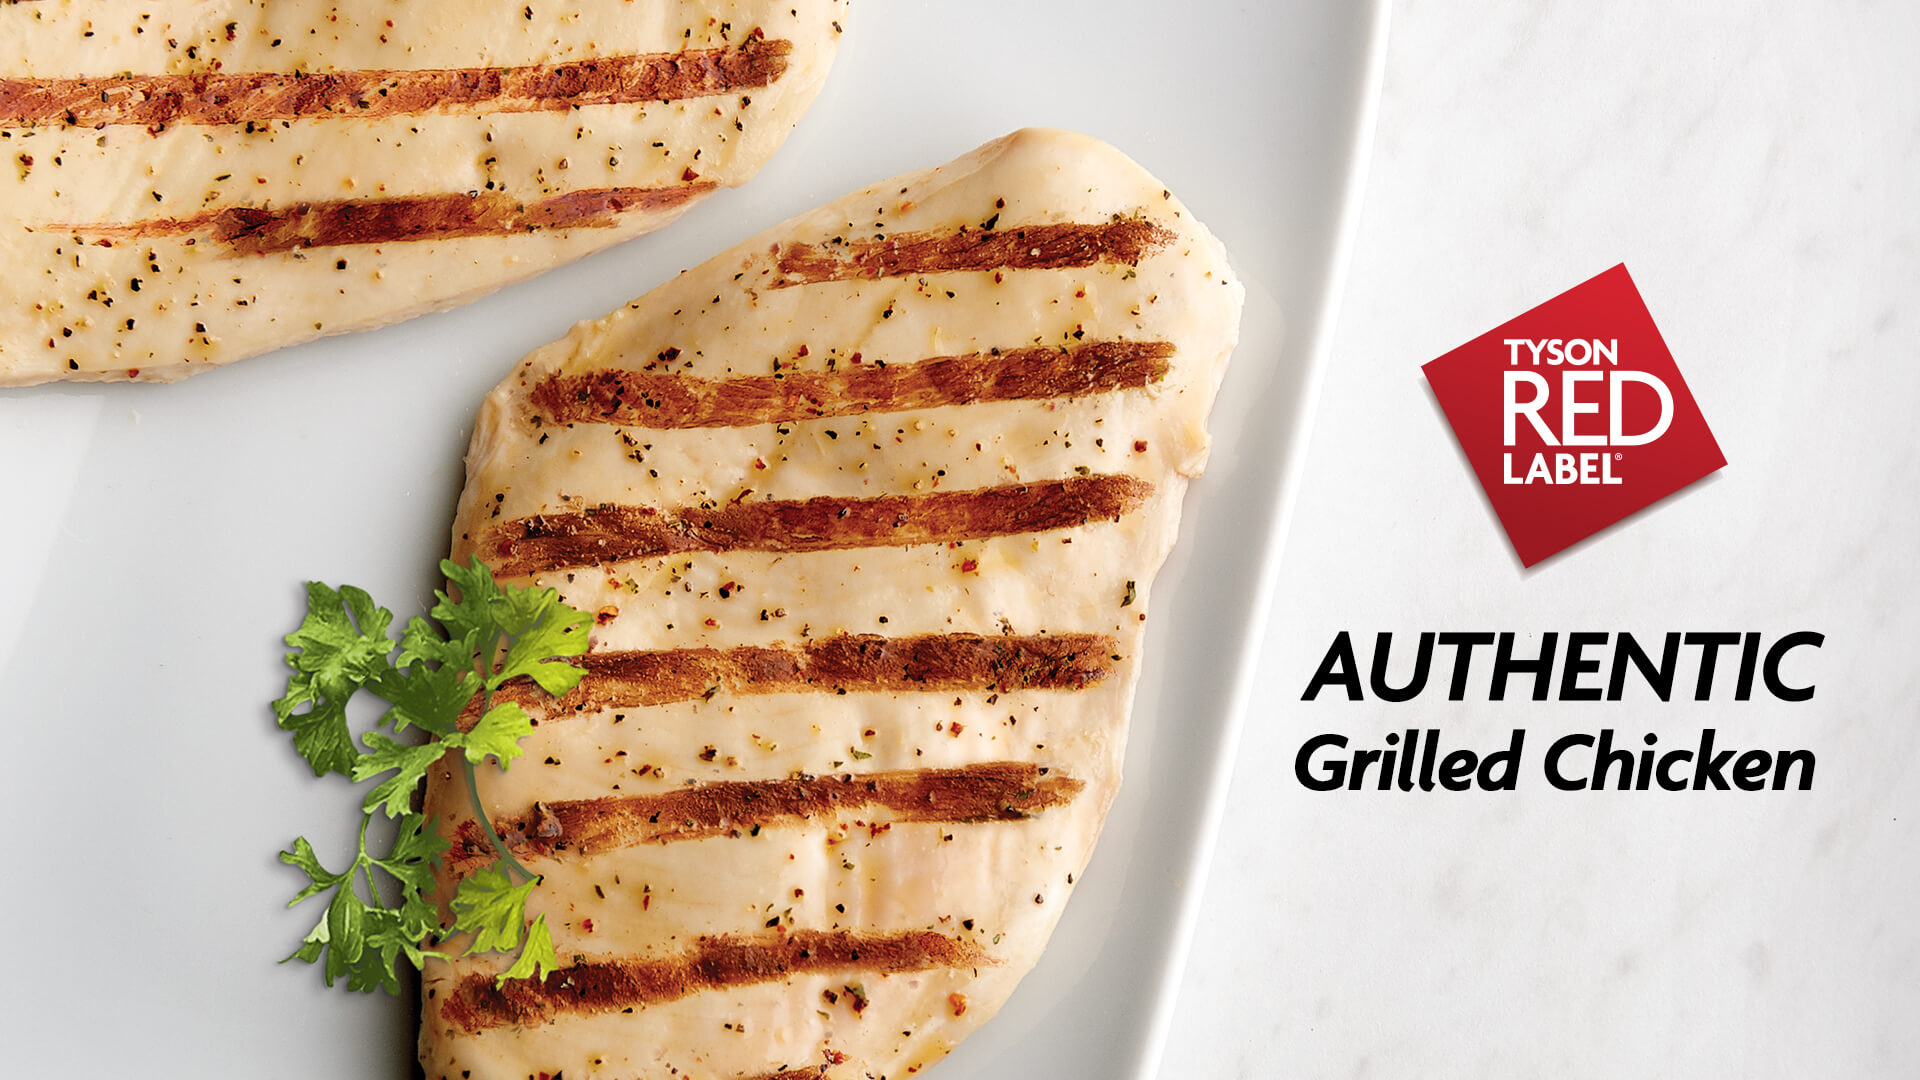 Tyson Red Label Authentic Grilled Chicken